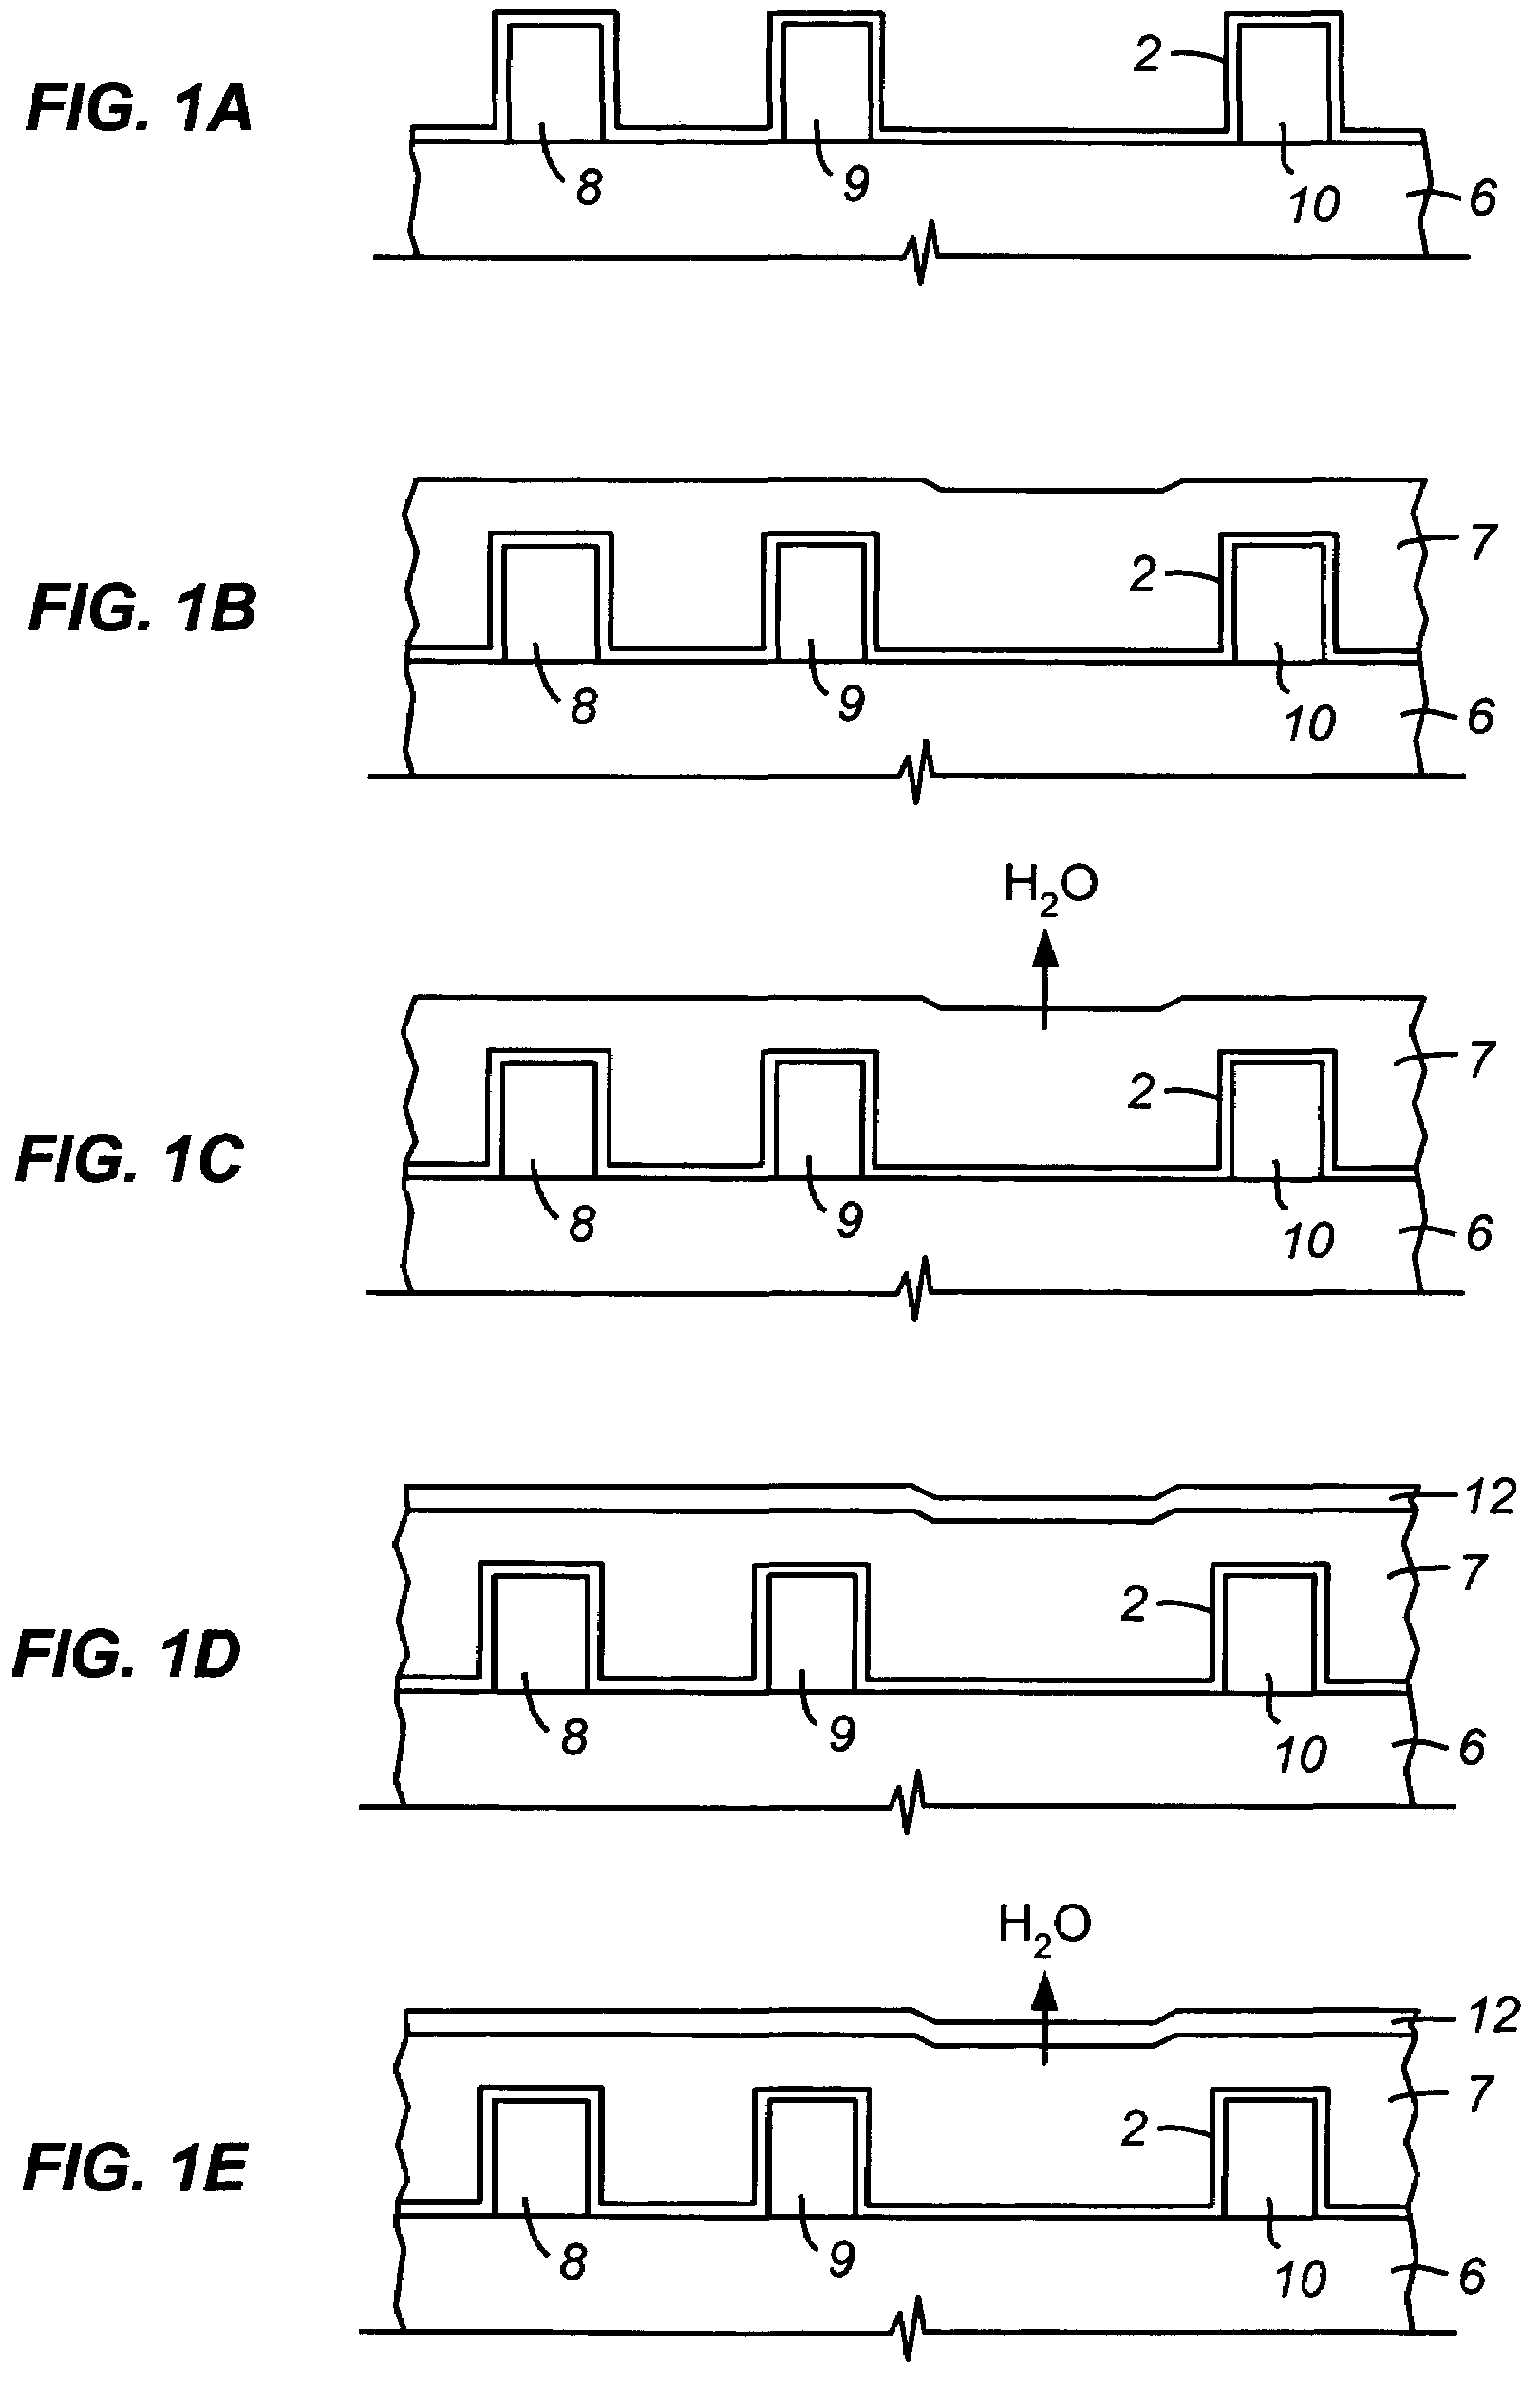 Formation of low K material utilizing process having readily cleaned by-products